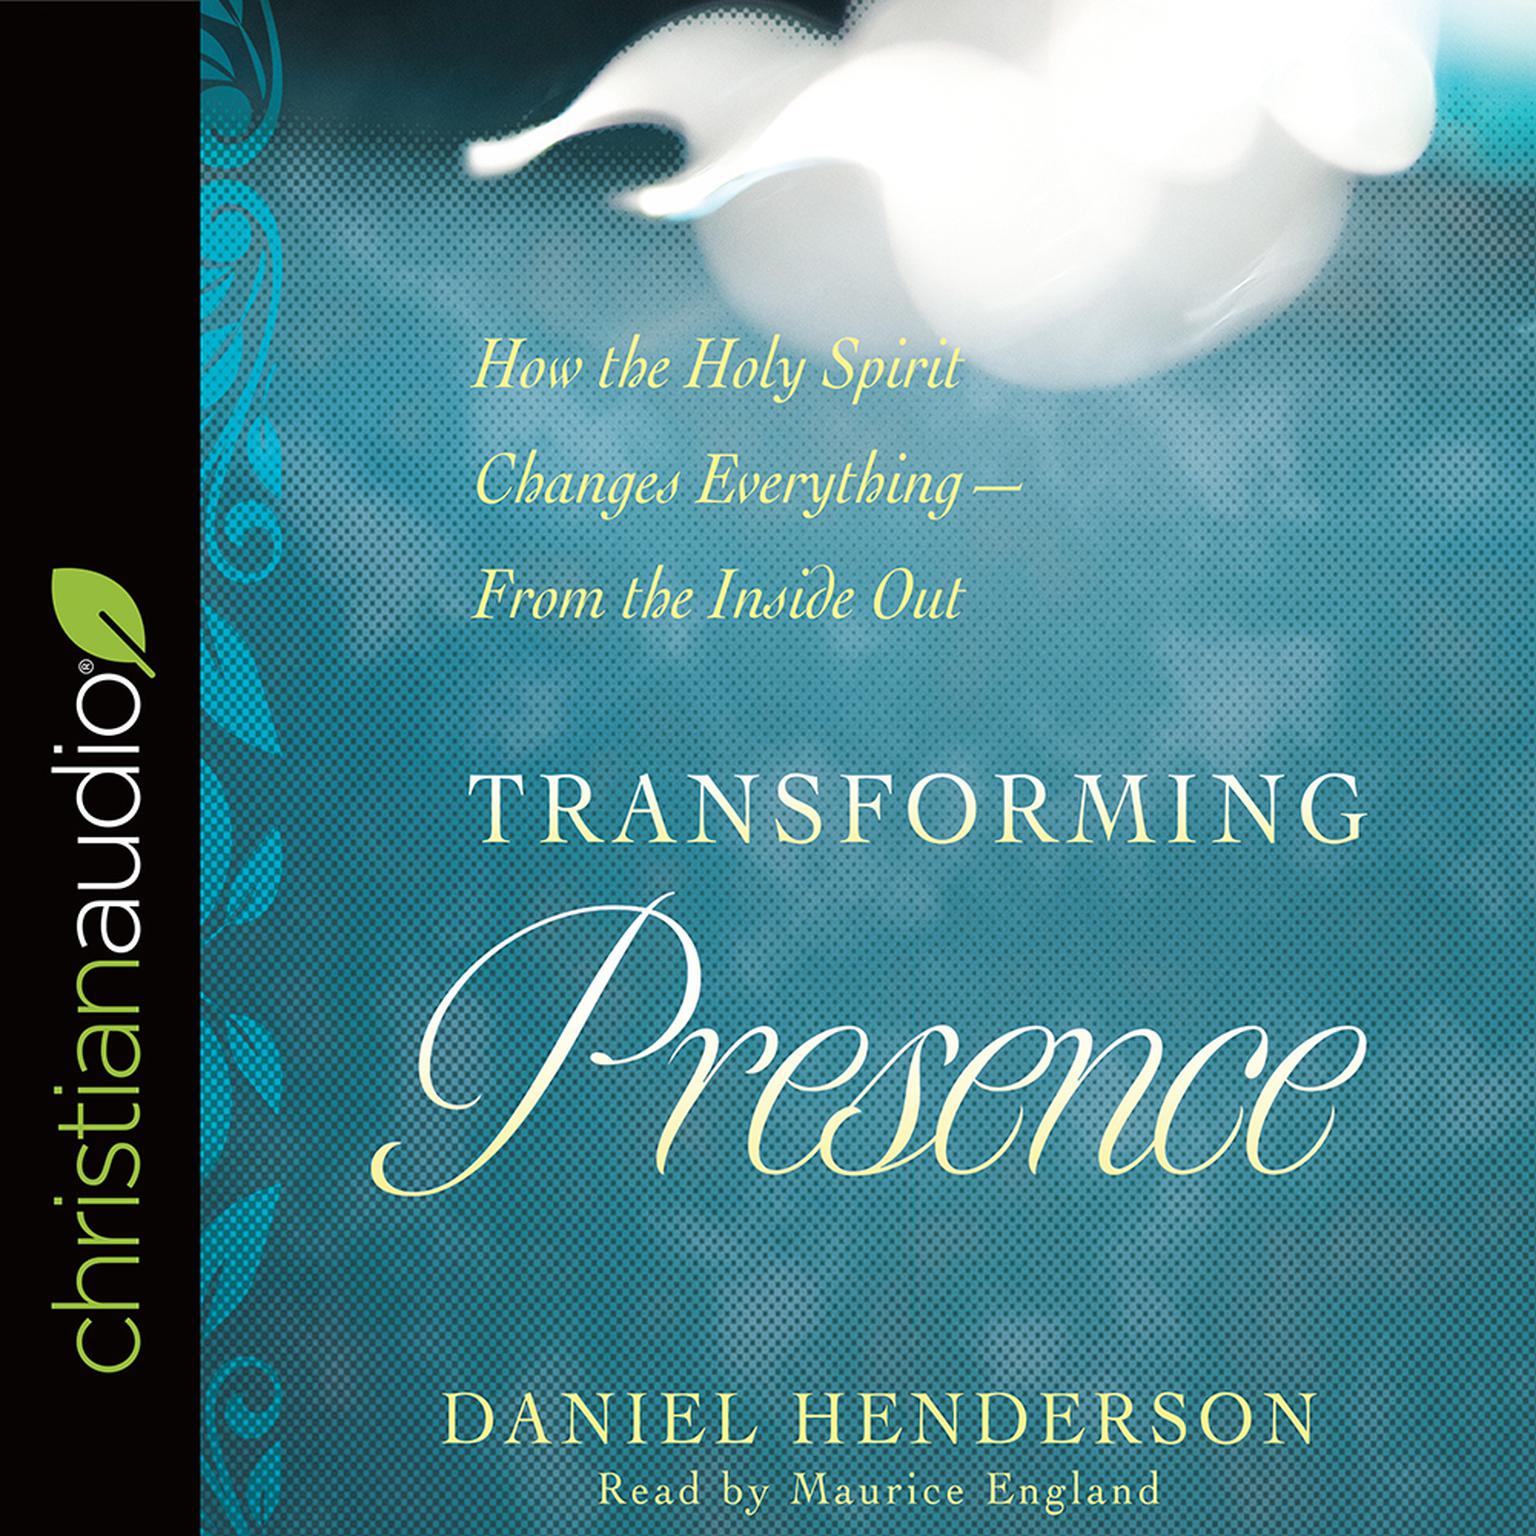 Transforming Presence: How the Holy Spirit Changes Everything-From the Inside Out Audiobook, by Daniel Henderson